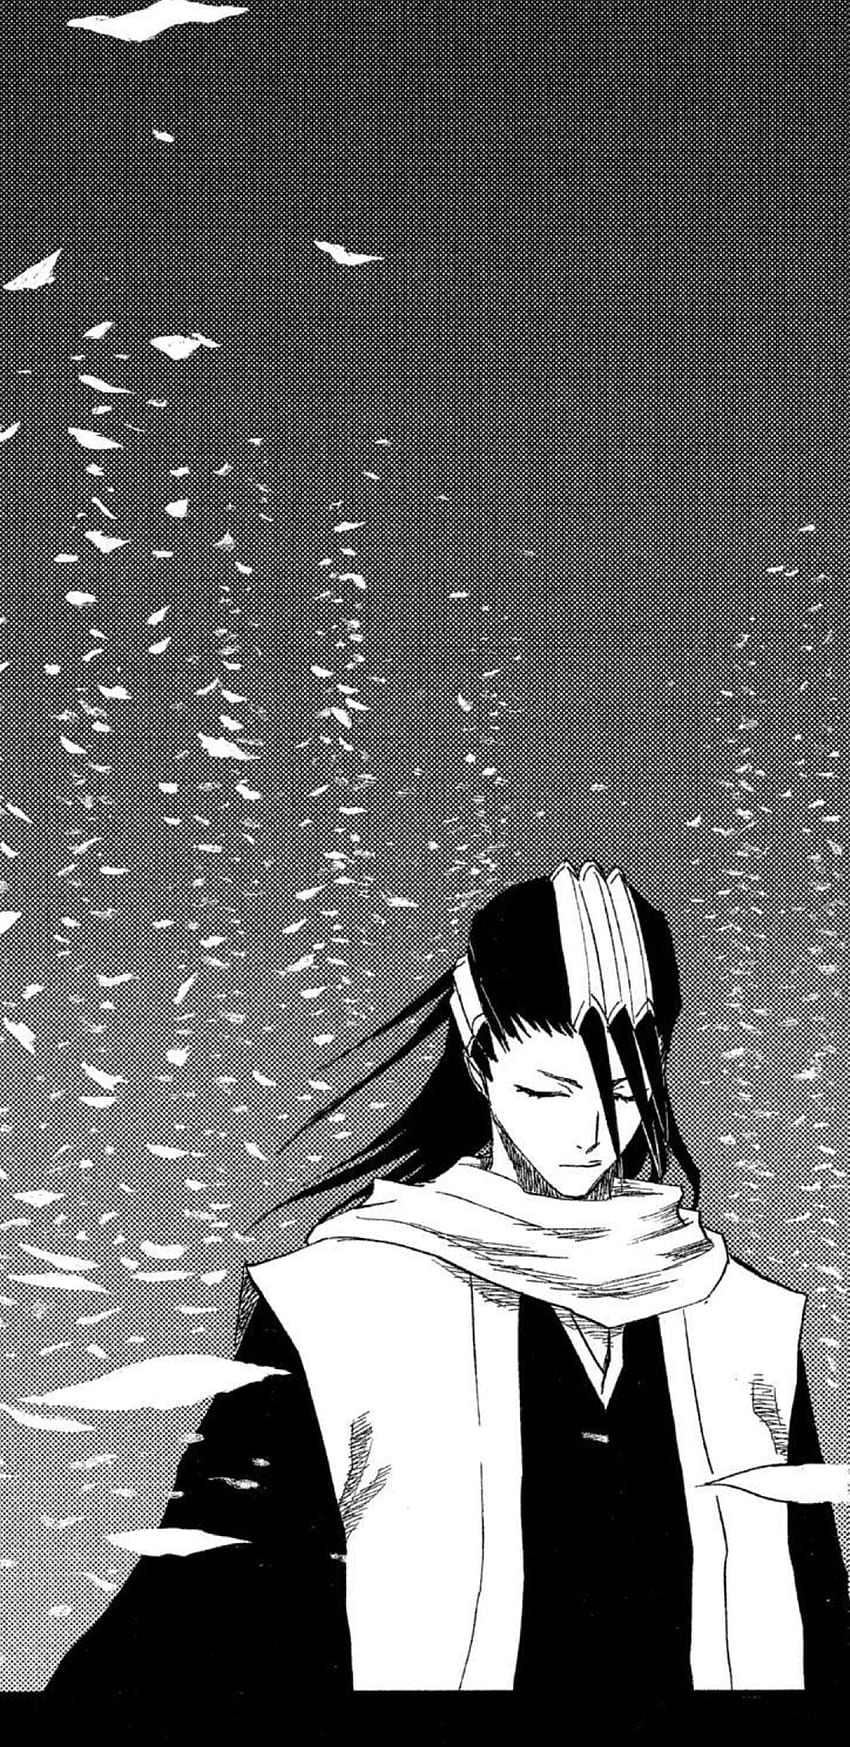 Thought this panel from the manga made for a great mobile, Bleach Manga HD phone wallpaper